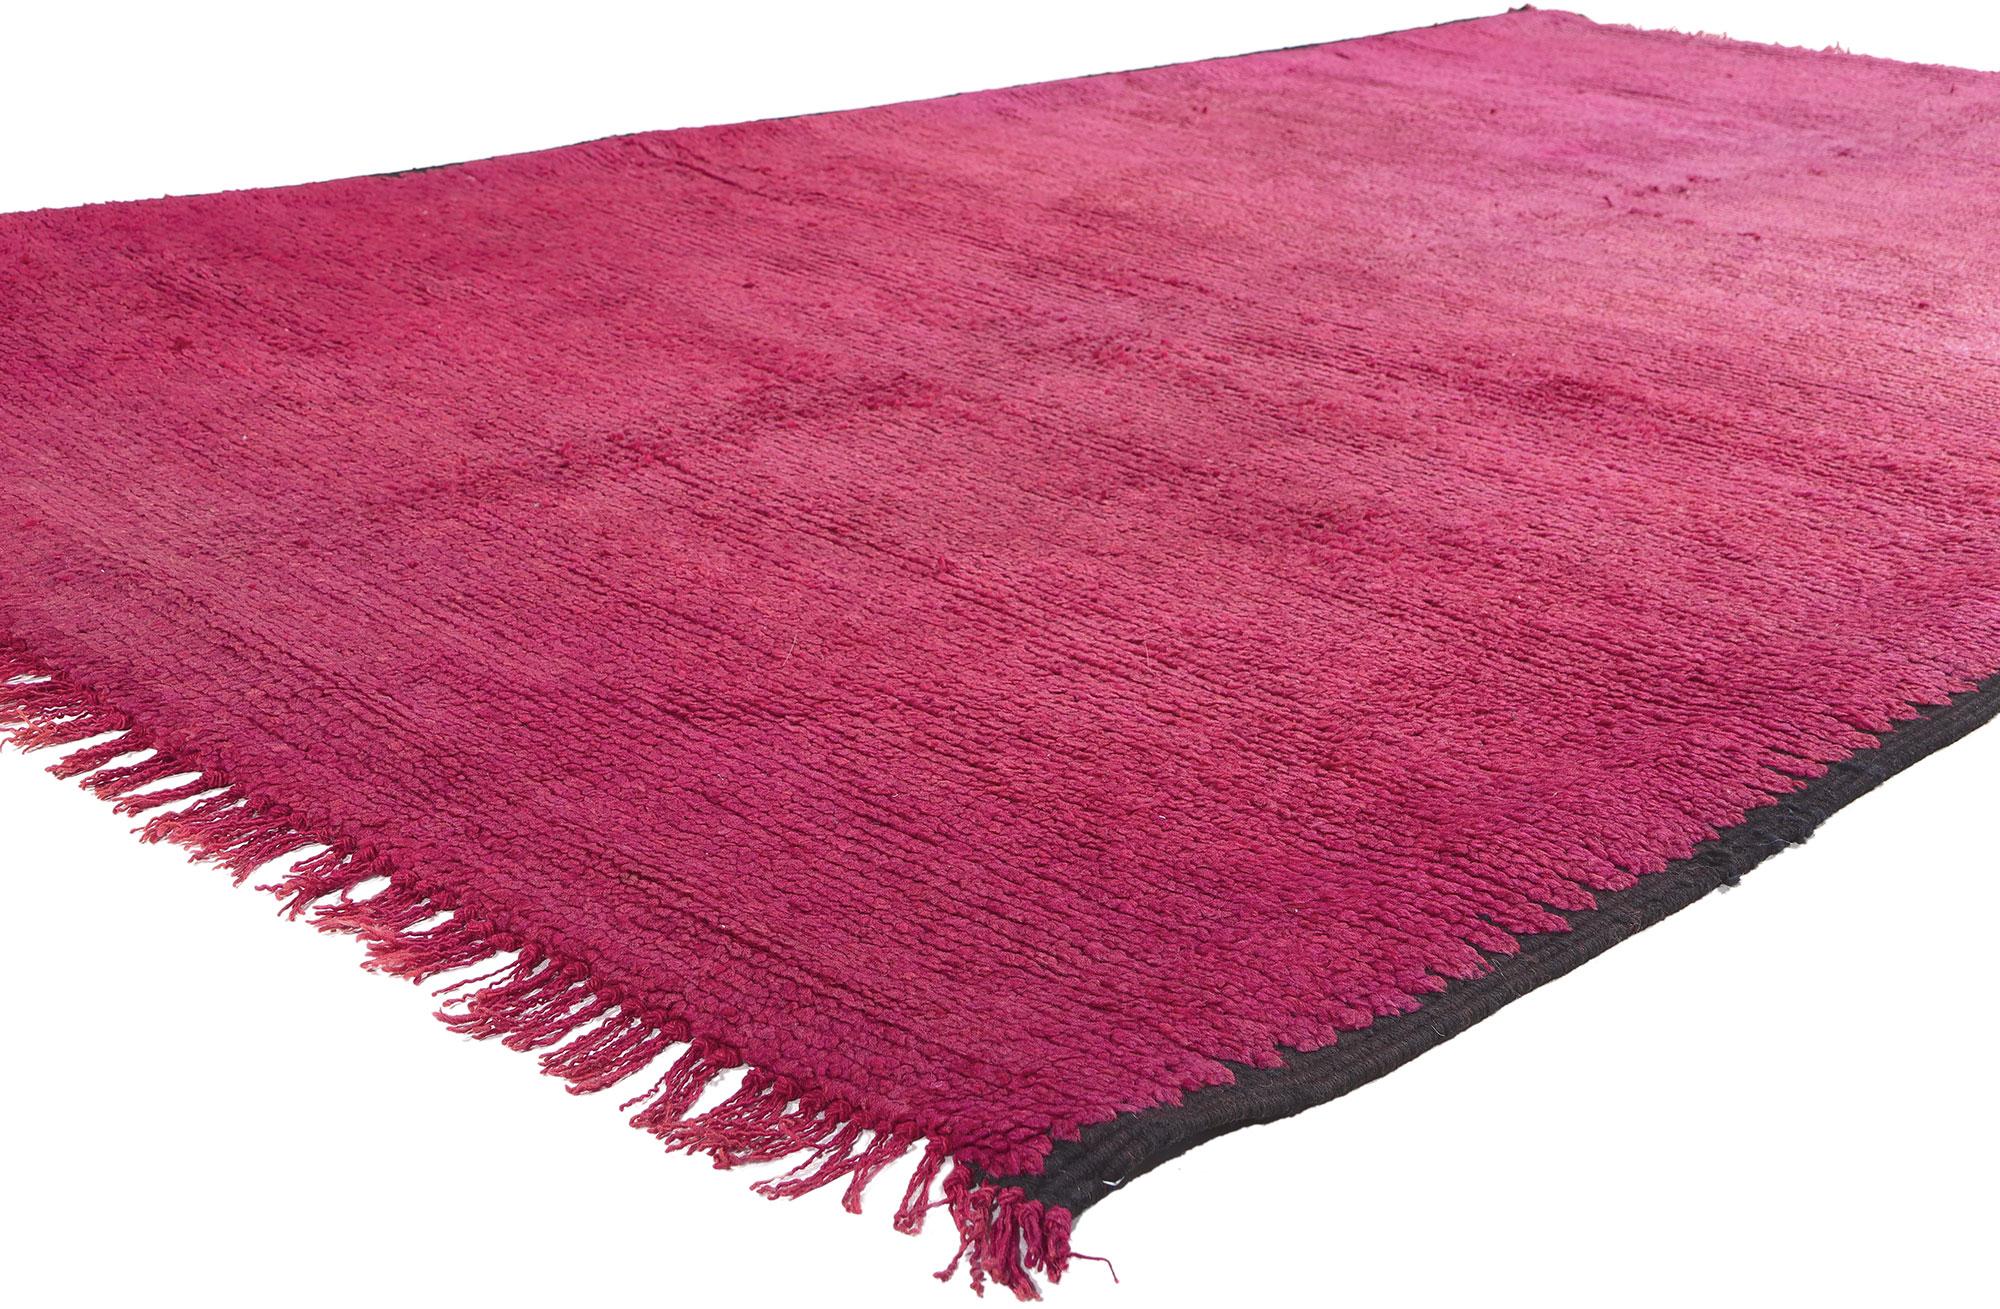 20228 Vintage Beni Mrirt Moroccan Rug, 05'11 x 09'06. 
Step into the embrace of a cozy nomad mingling with the delightful hues of raspberry sorbet in this hand-knotted wool vintage Beni Mrirt Moroccan rug. Allow yourself to be transported to a